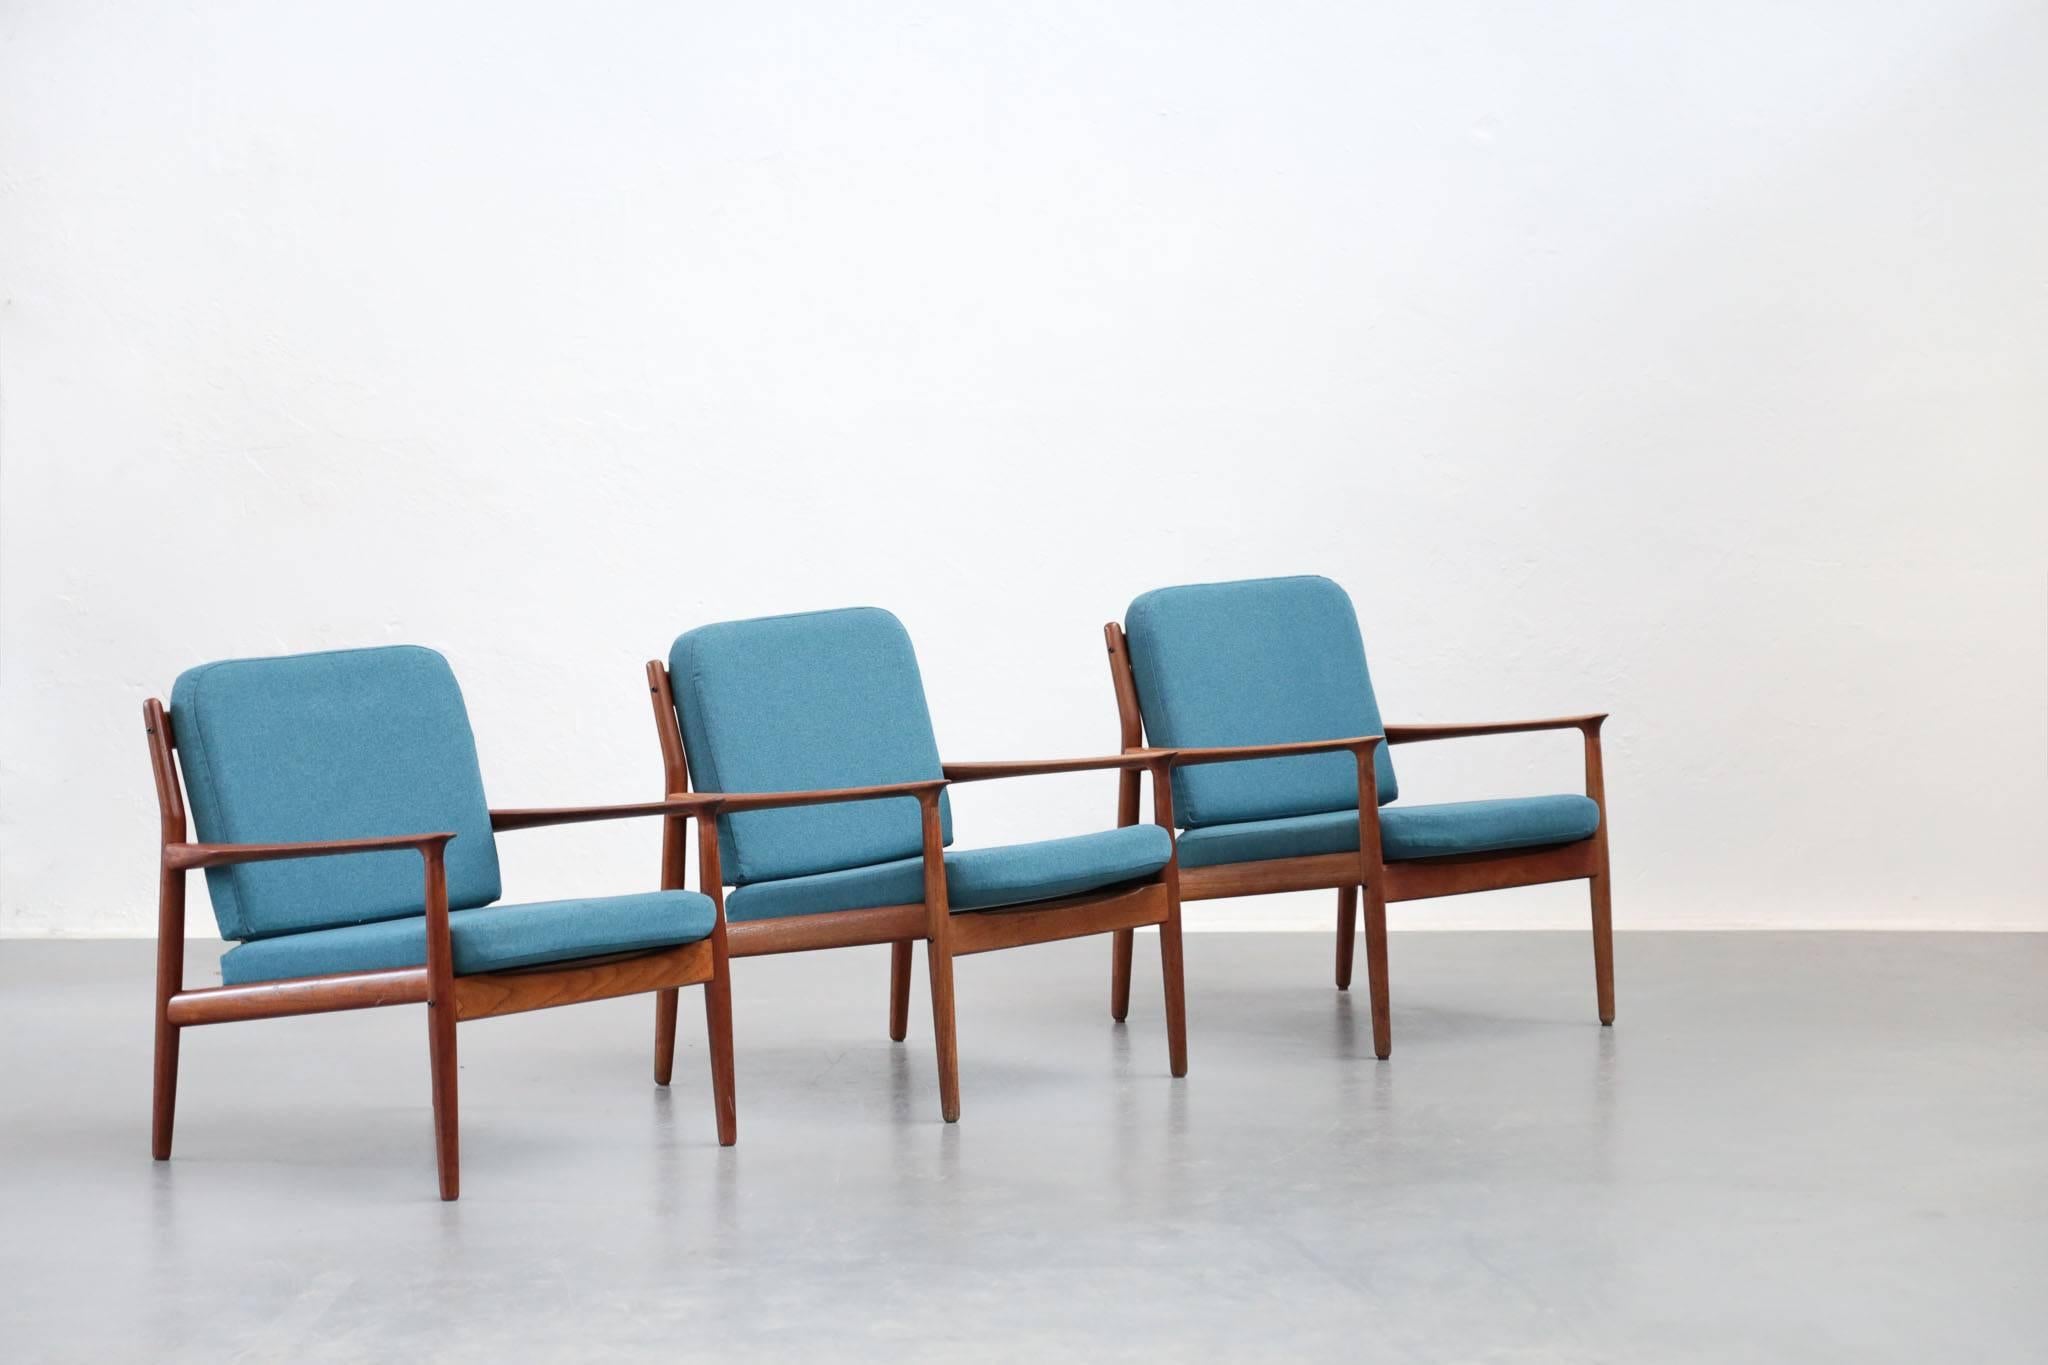 Set of three lounge chair designed by Grete Jalk, Scandinavian design for Glostrup
Freshly reupholstered,
Request for different color, ask to be reupholstered.